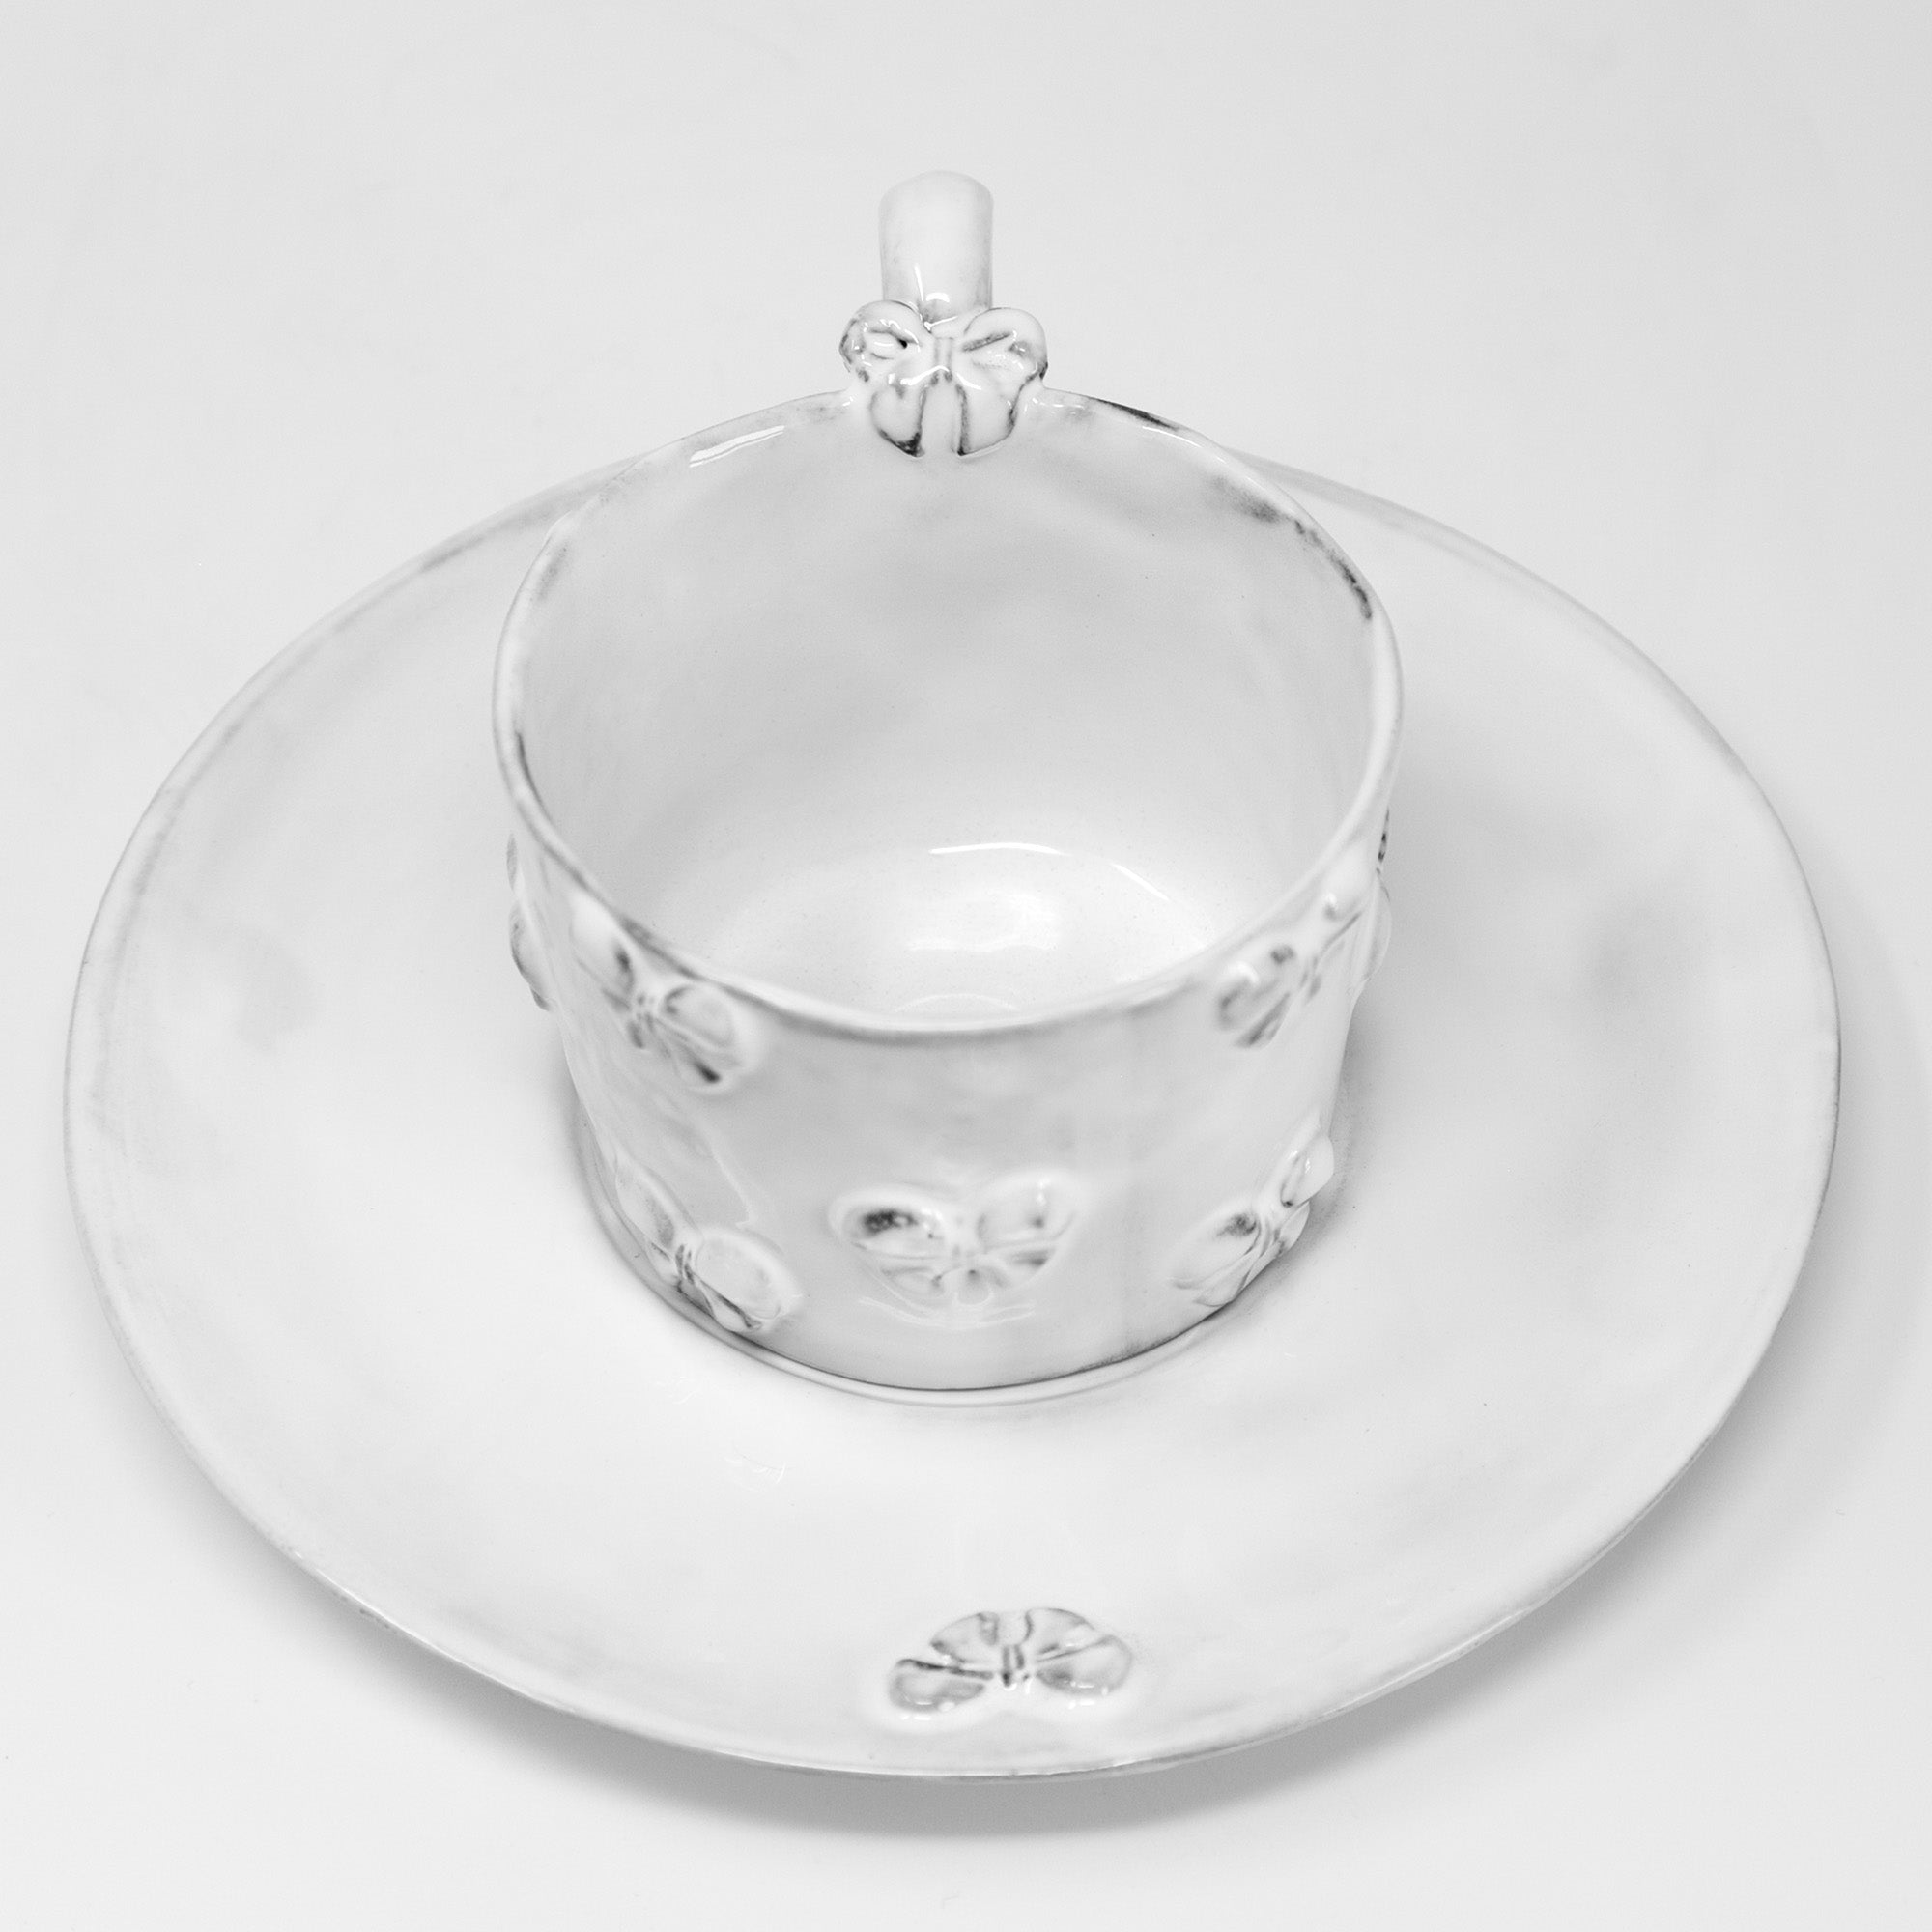 Noeud-Noeud cup and saucer